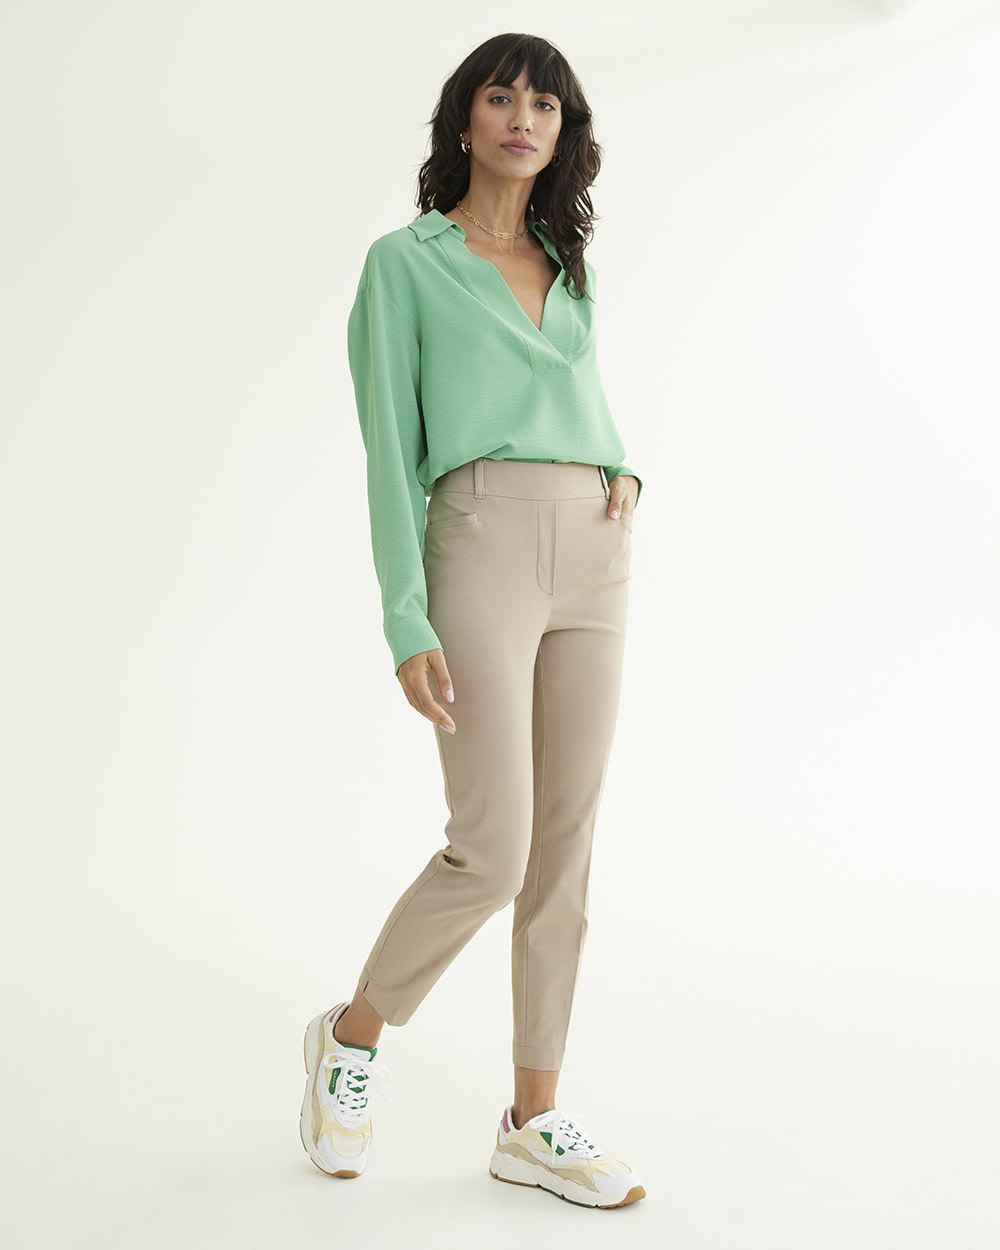 Slim-Leg High-Rise Ankle Pants, The Iconic